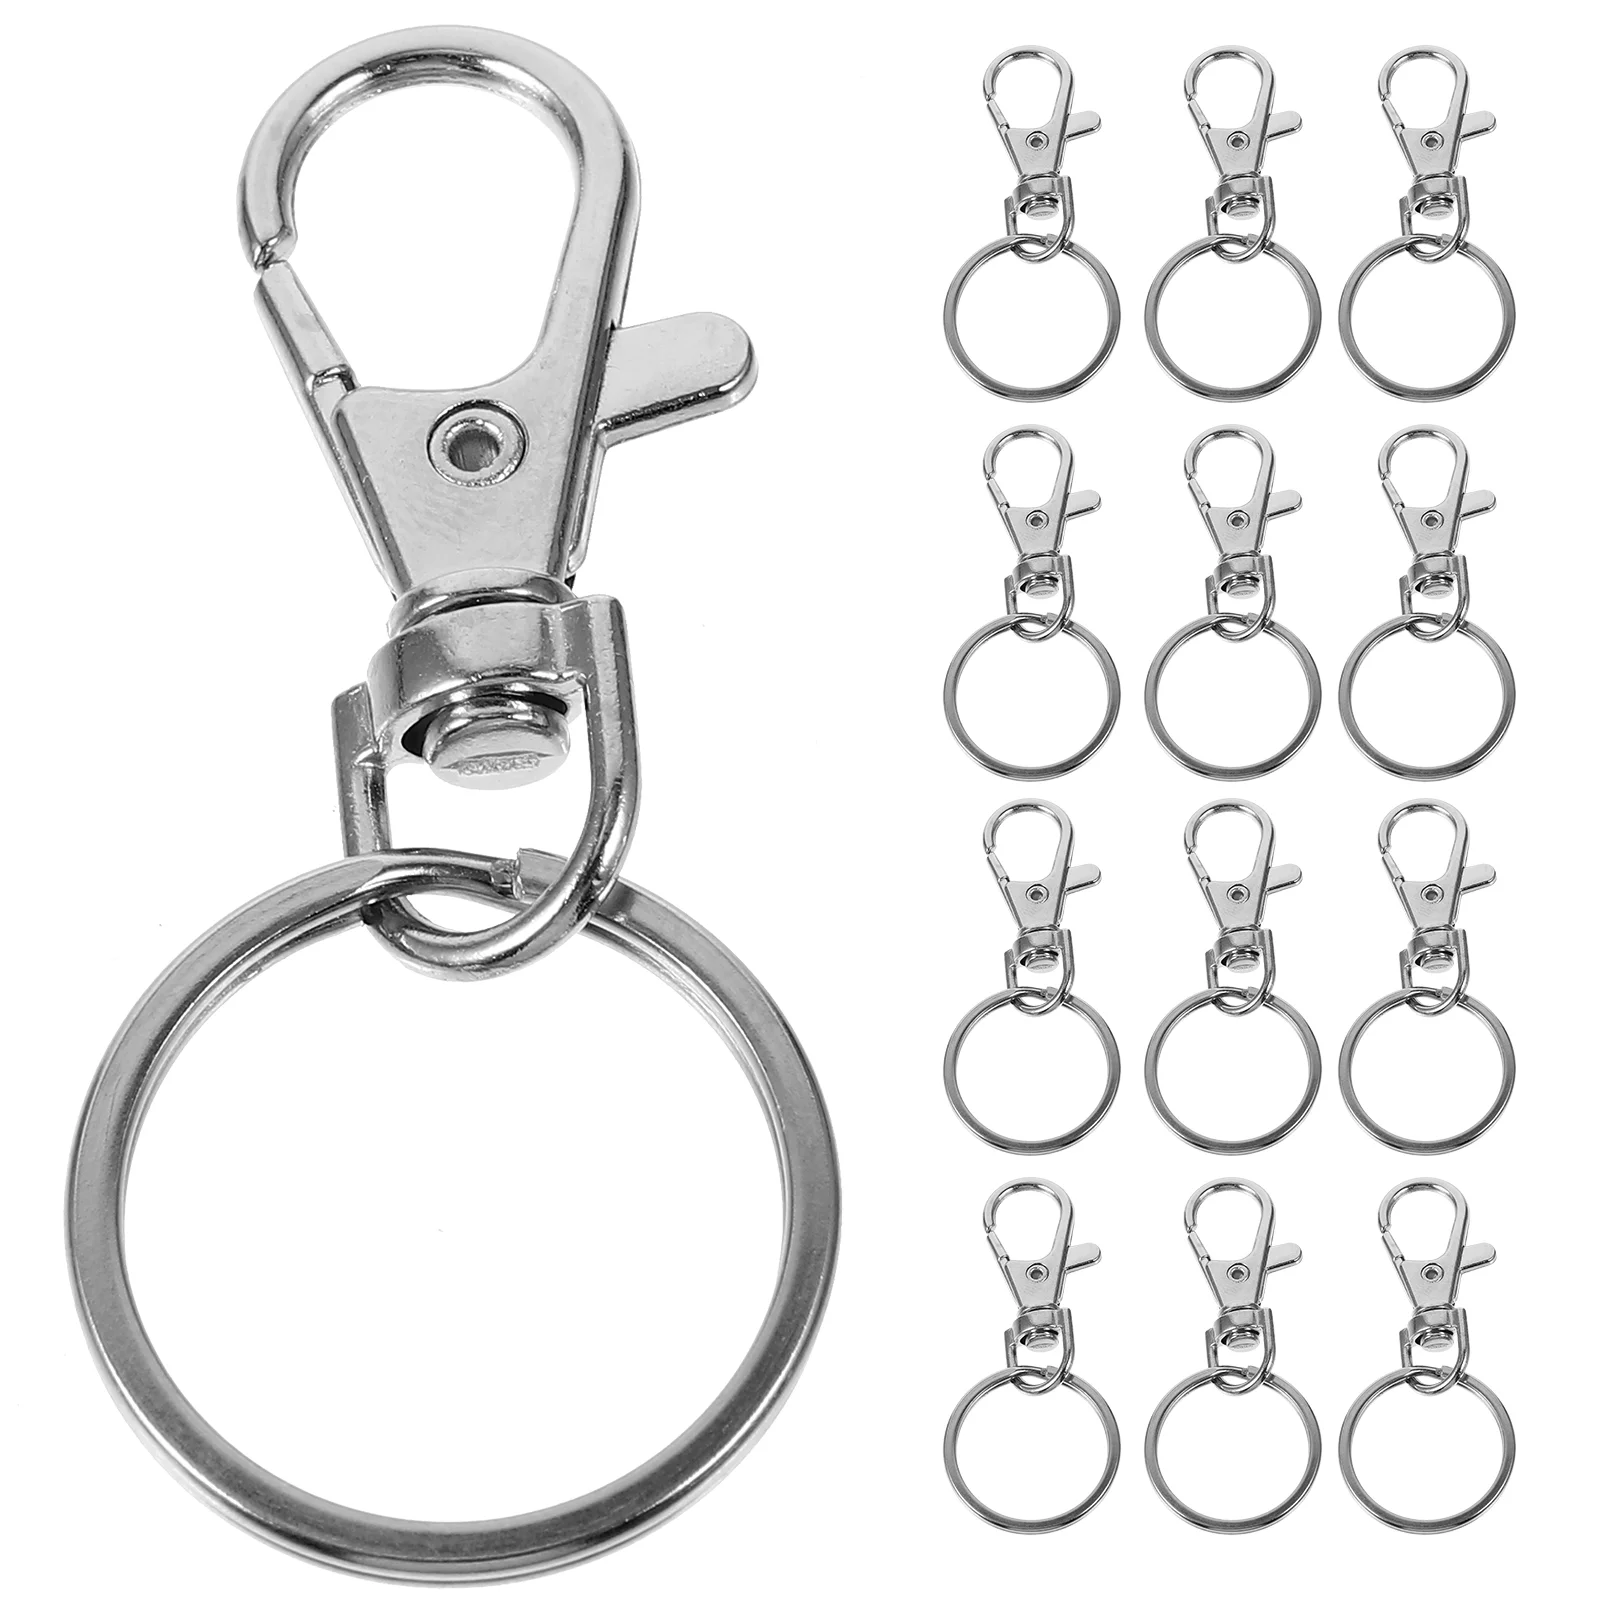 

40 Pcs Key Chain Clips Swivel Snap Hooks Collar Buckle Keychain Crafts Keyring Zinc Alloy Rings Clasp Keyrings Crafting